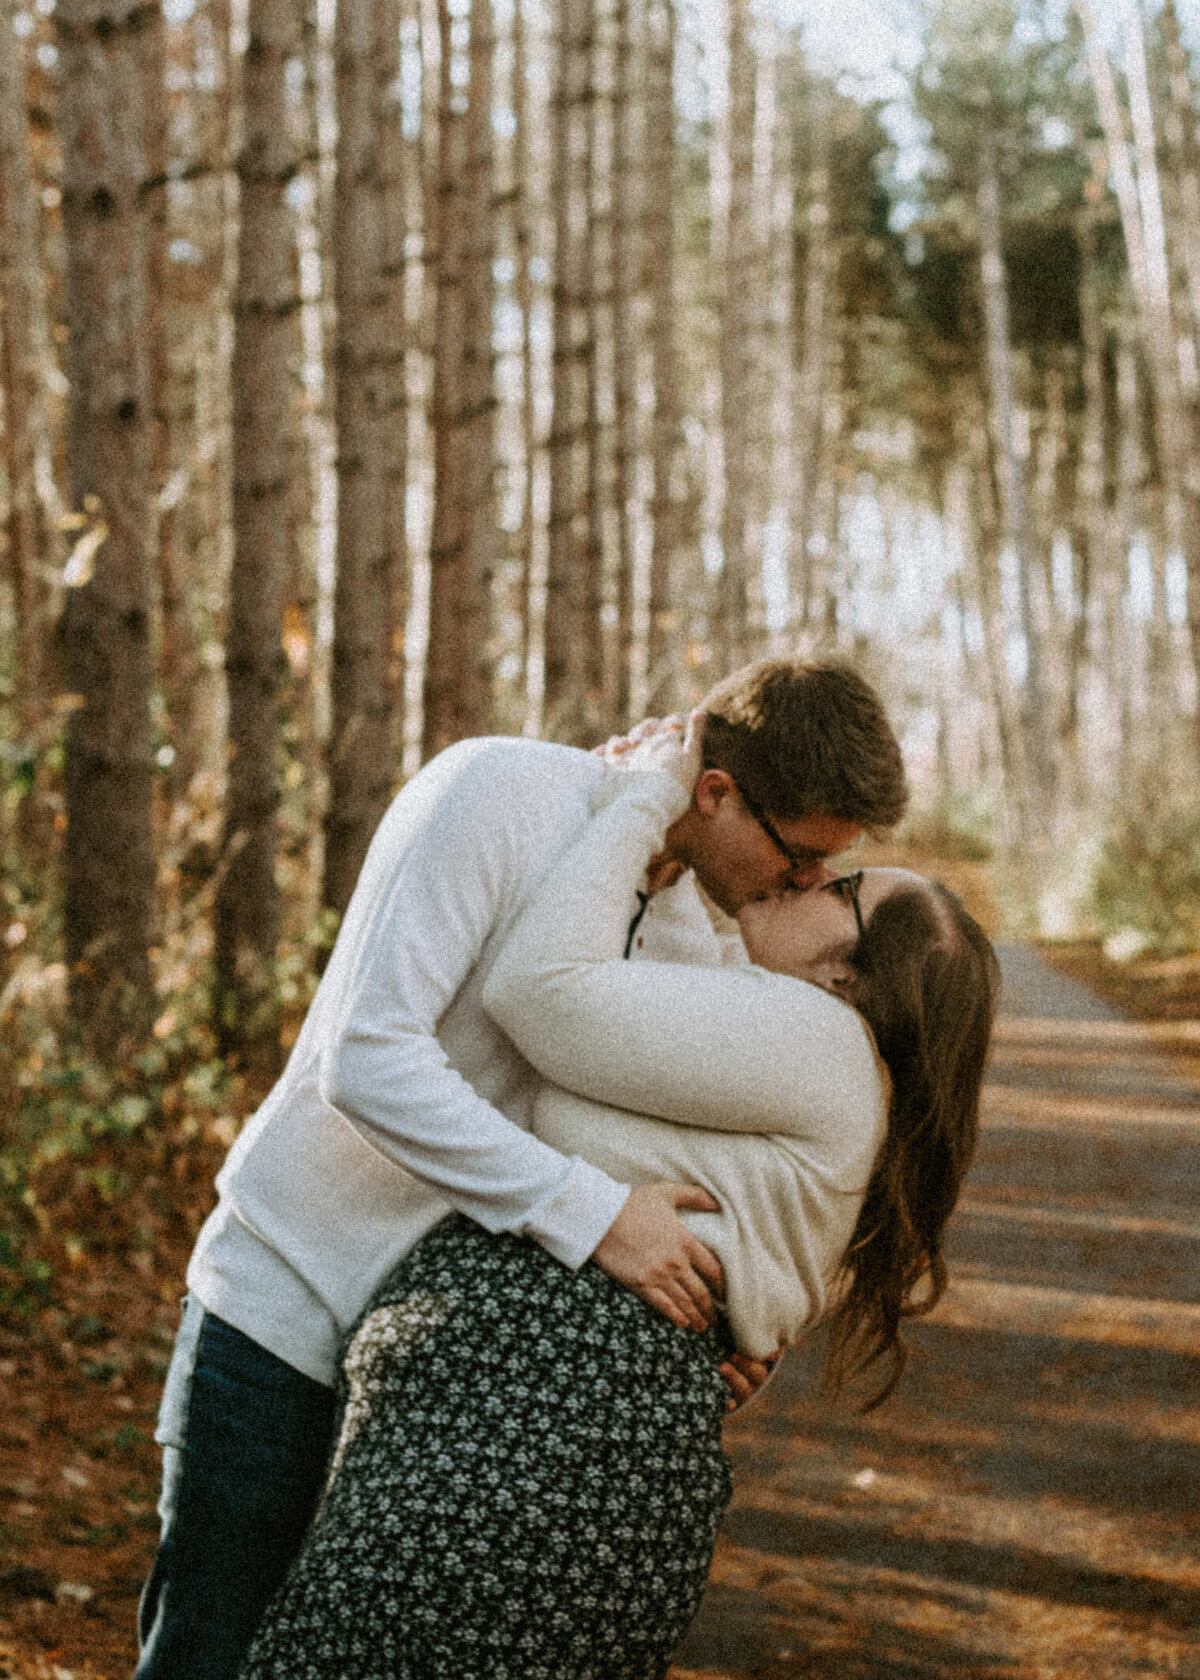 Couple kissing in a forest of pine trees.